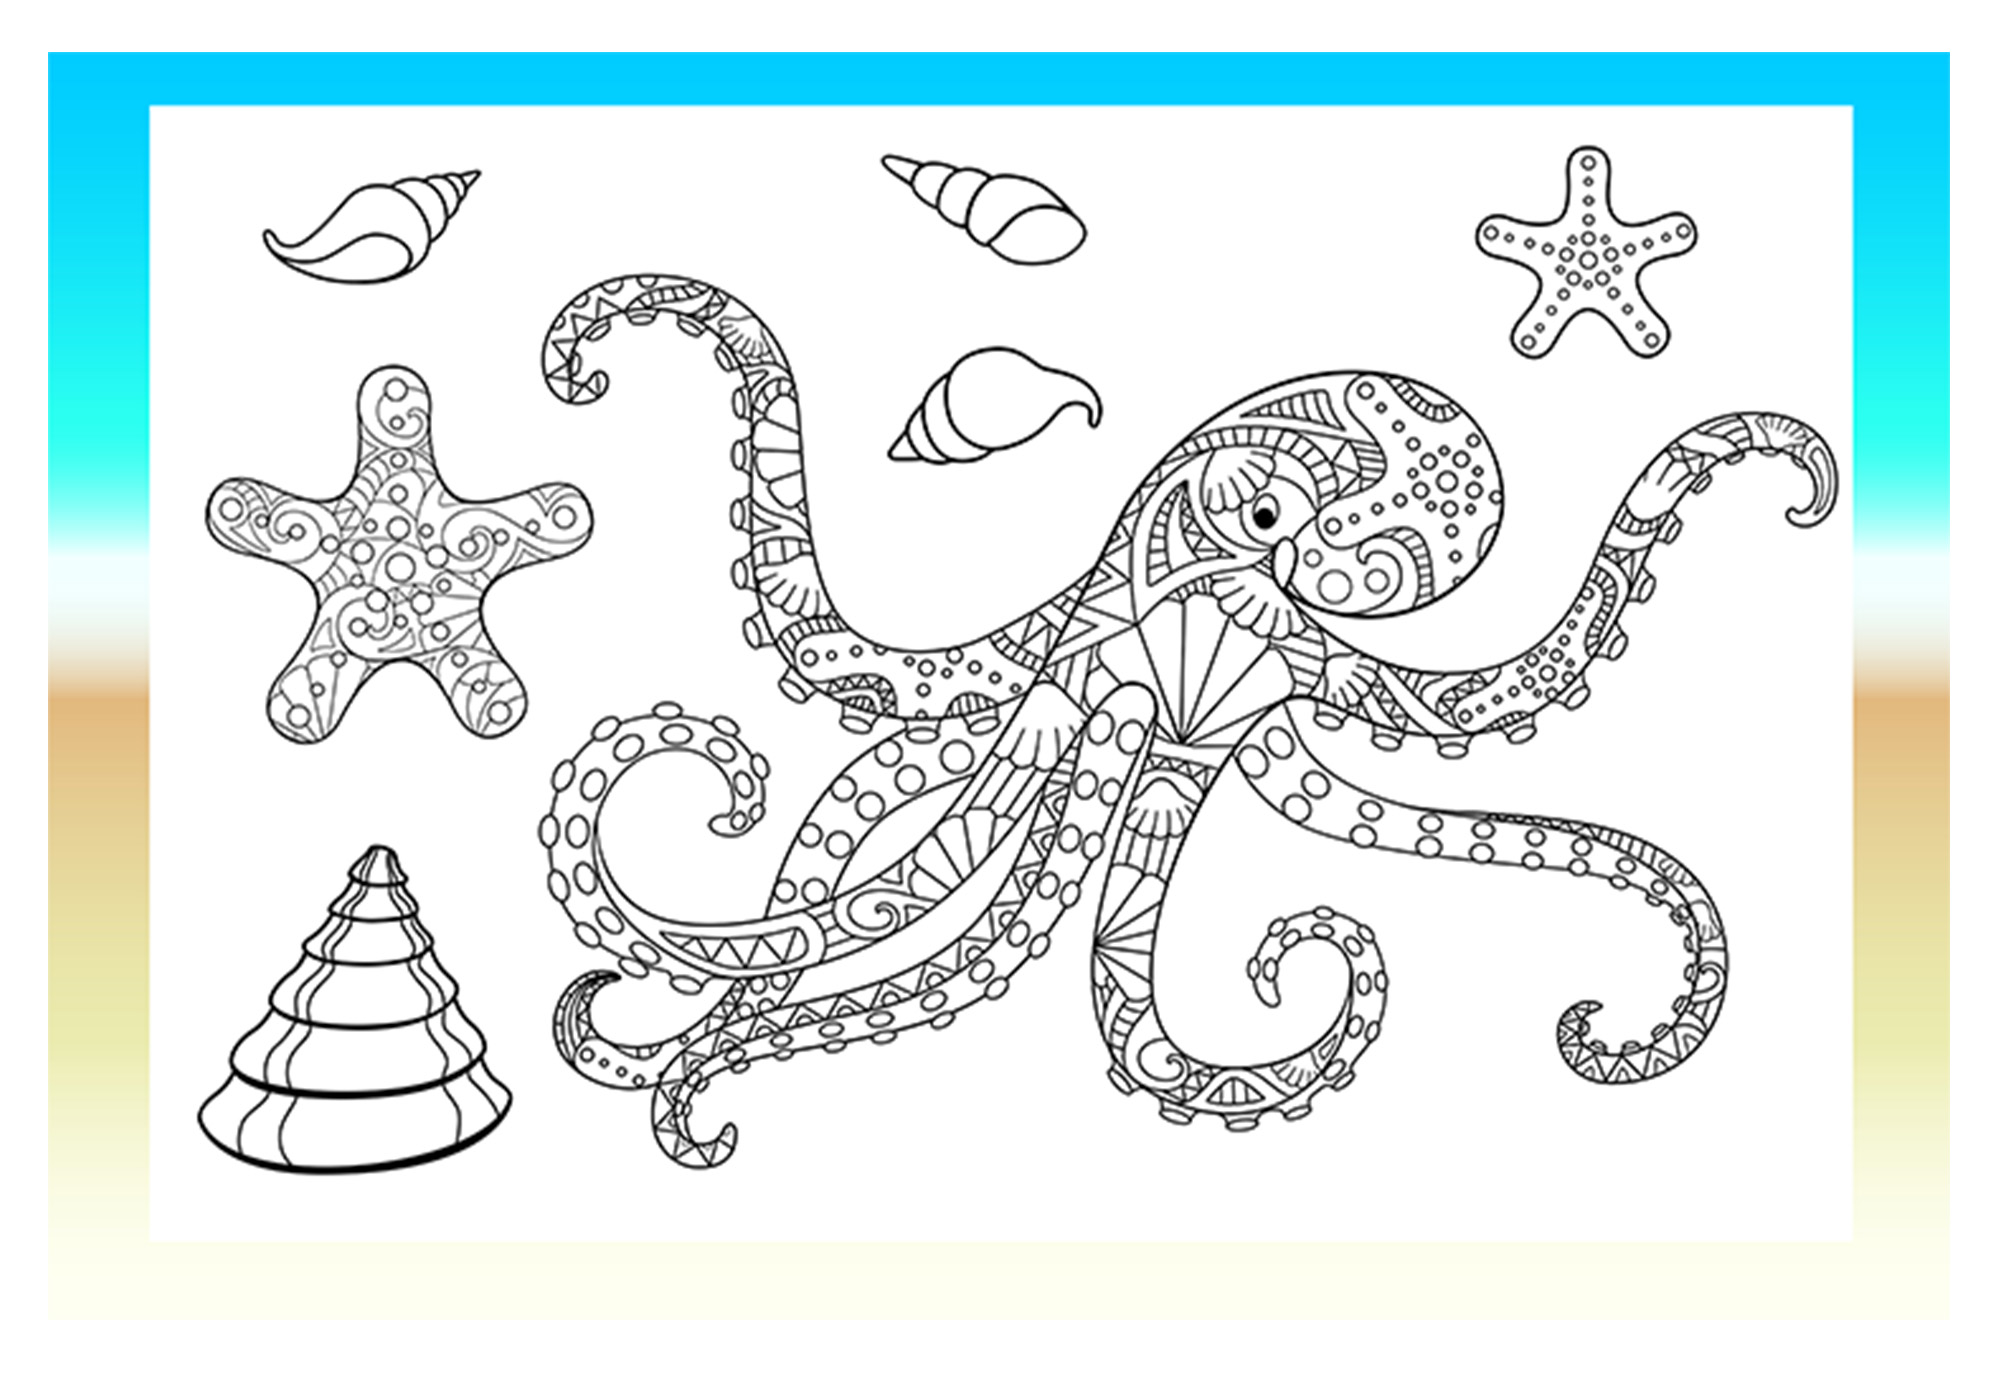 Coloring page with an octopus and starfish.